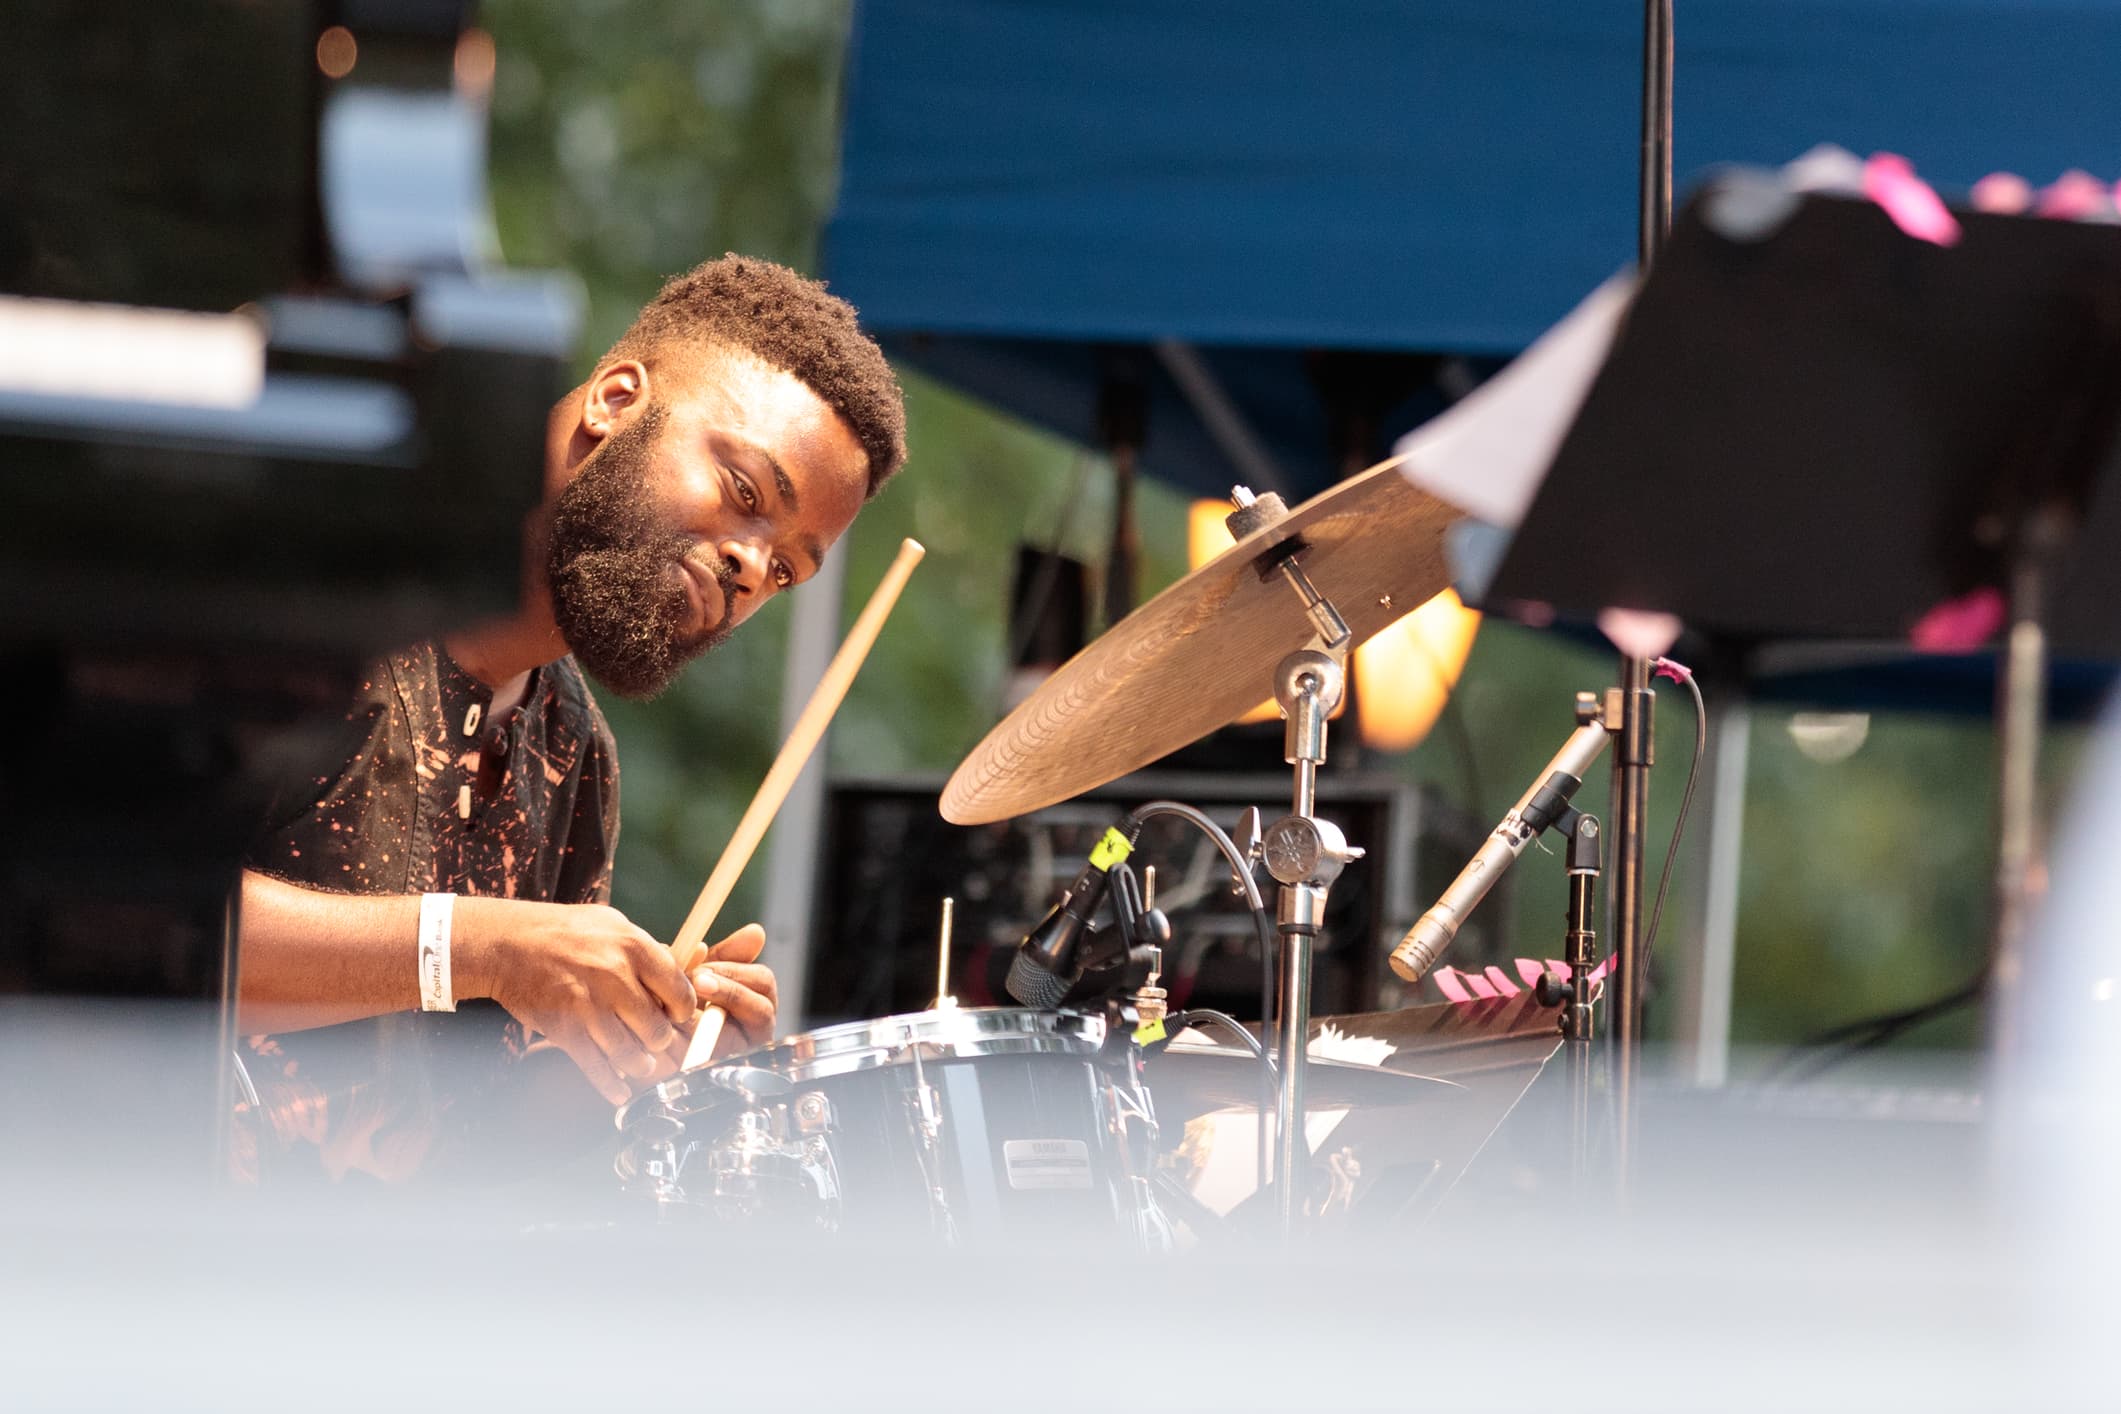 A jazz drummer play9ing at the Charlie Parker Jazz Festival in NYC